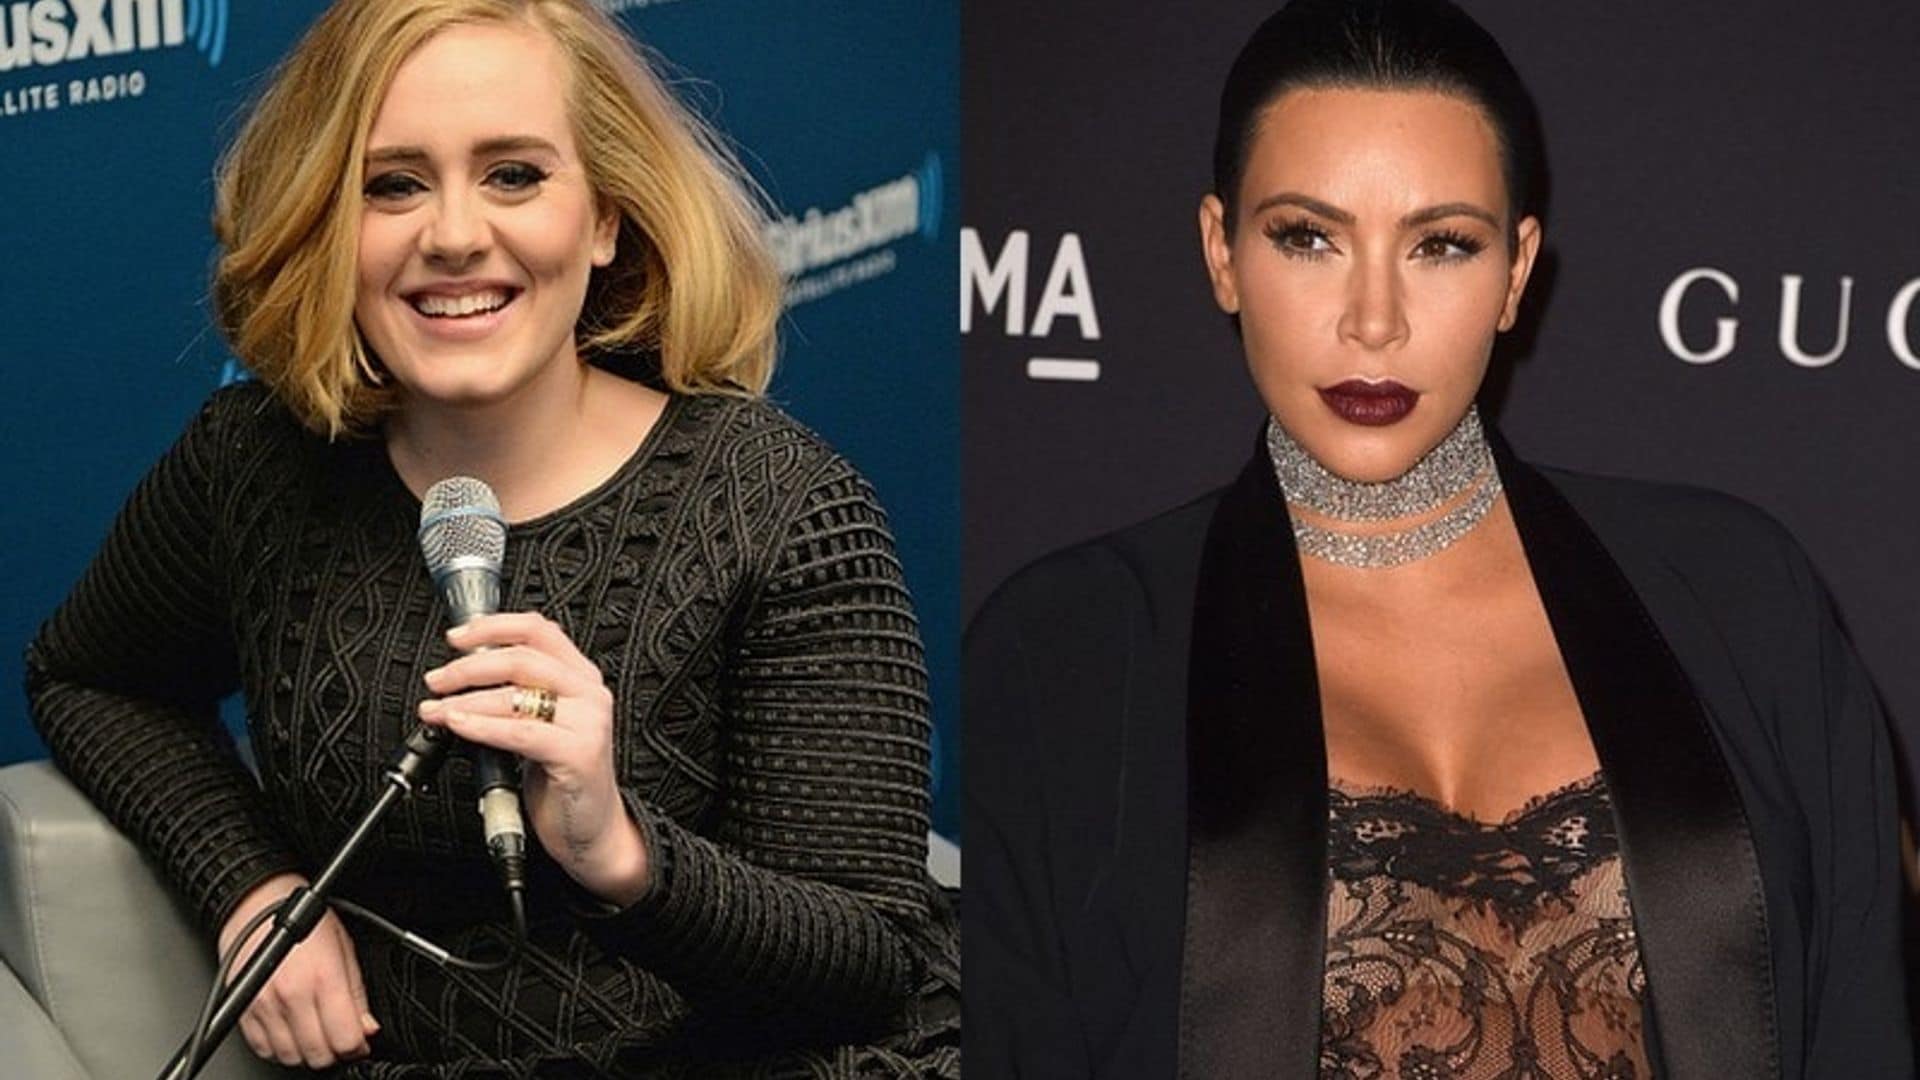 Adele pulled a Kim Kardashian and broke the Internet with "Hello"